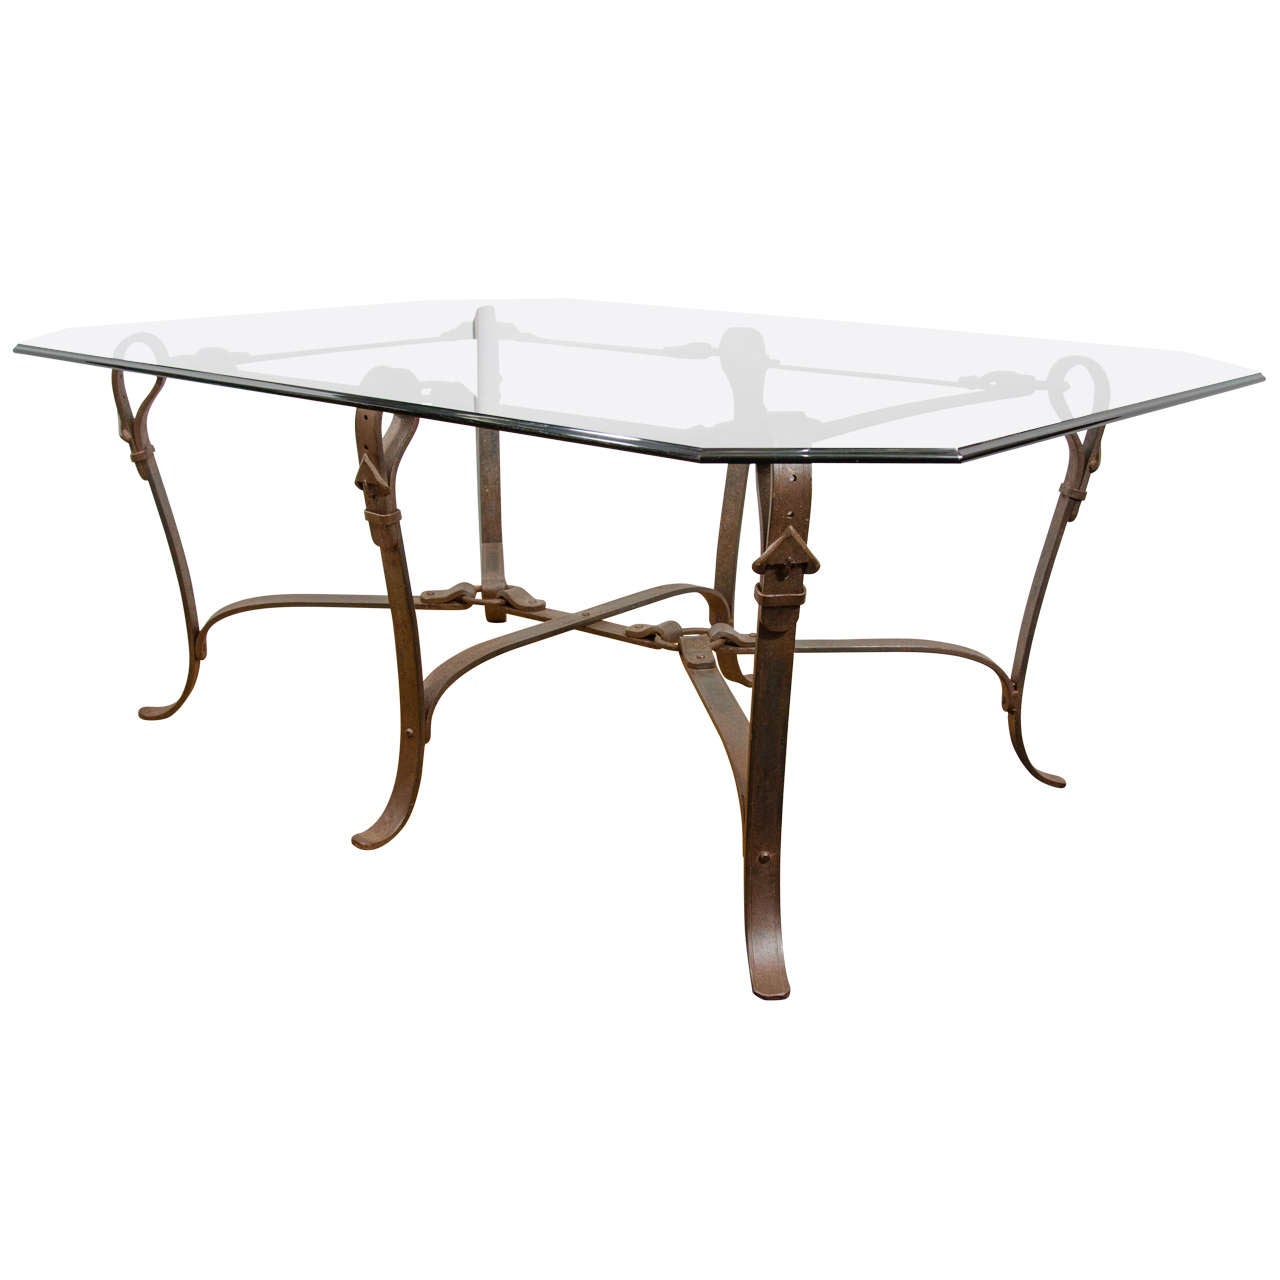  Stunning Modernist Gucci Influenced Equestrian Hand-Forged Iron Table For Sale